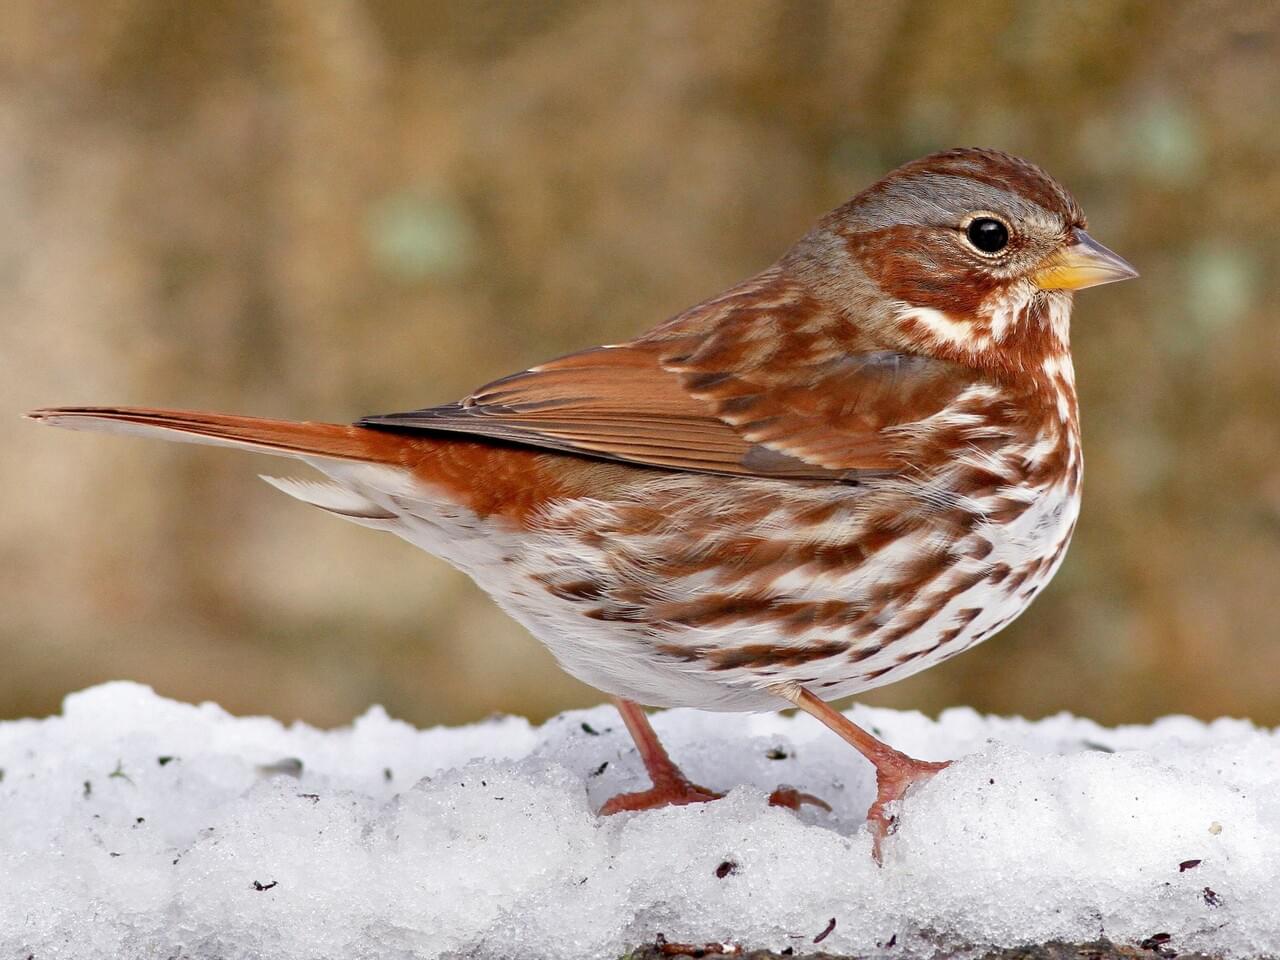 Fox Sparrow. More here from Cornell Lab of Ornithology's All About Birds website